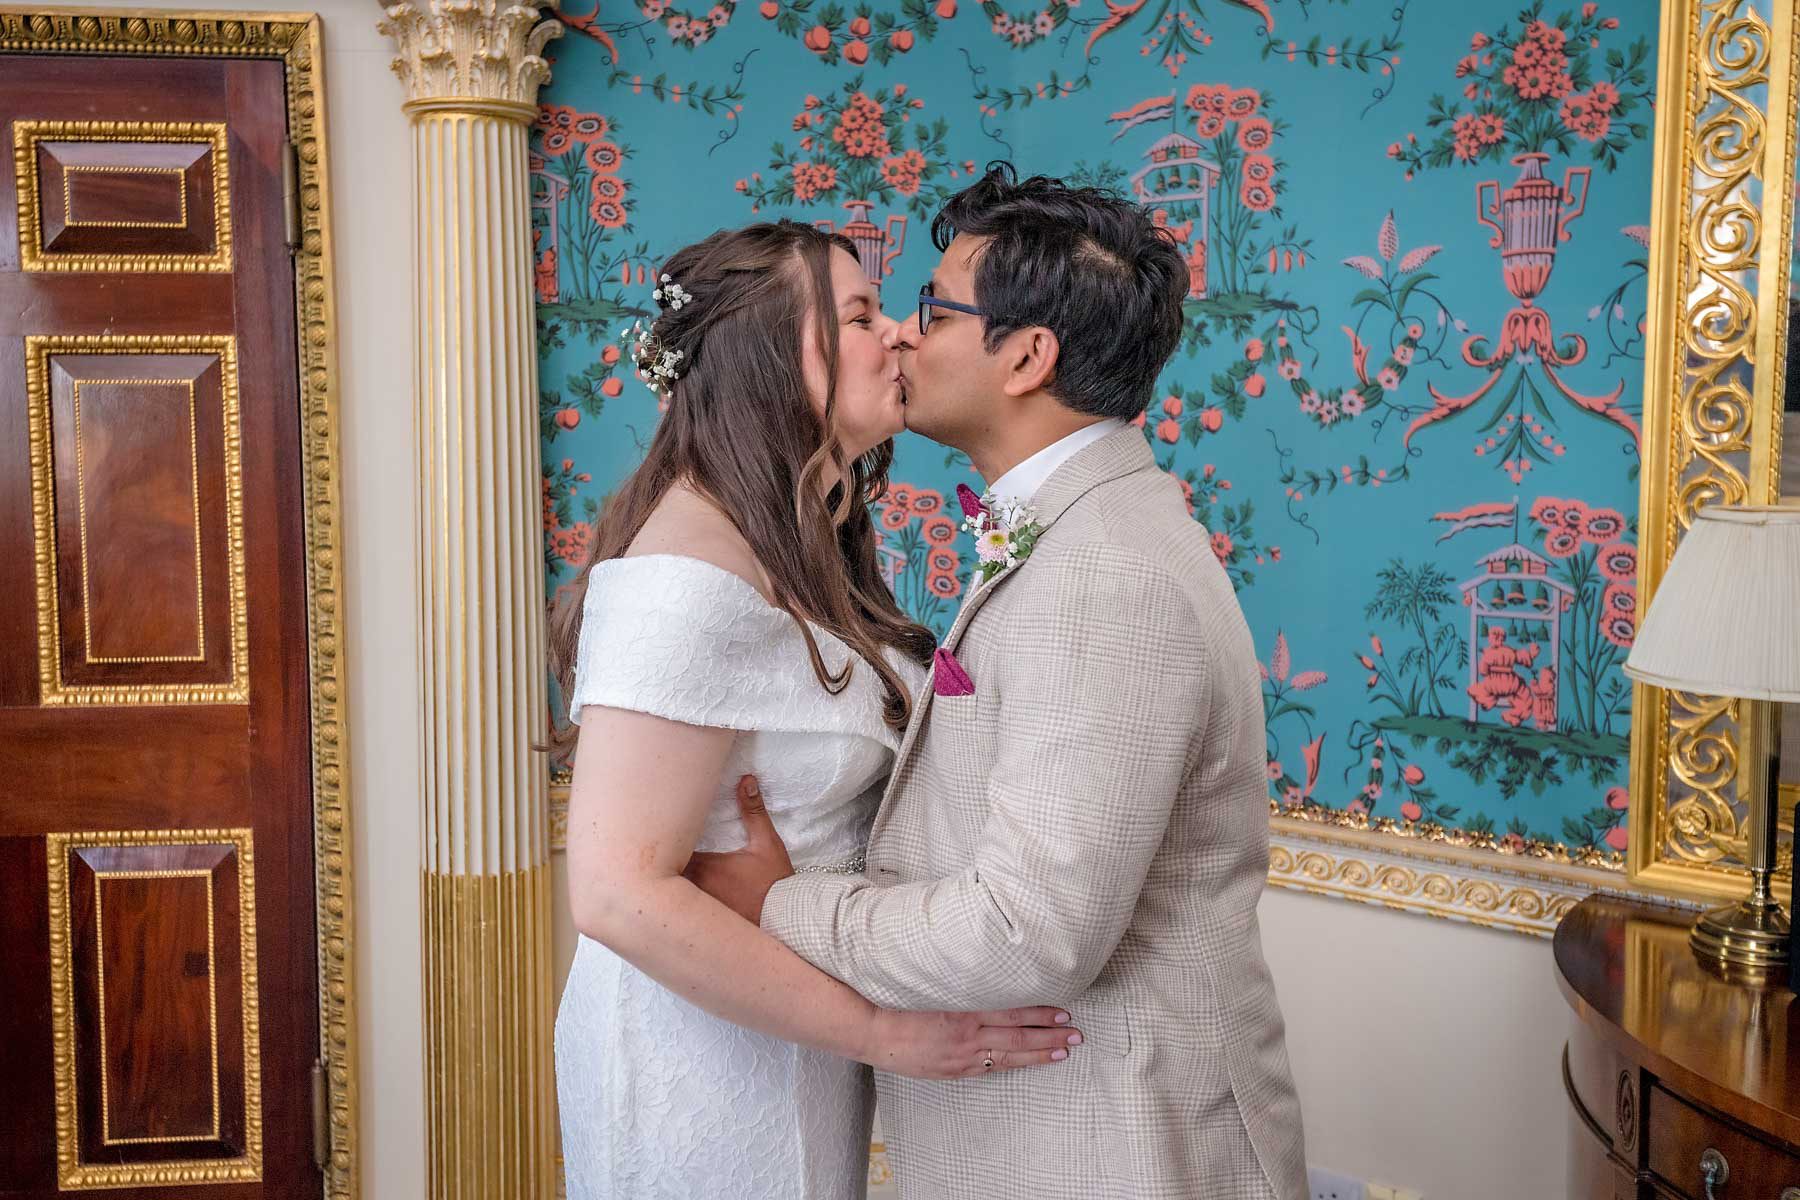 The newlyweds share their first kiss at their wedding in the Danson House Salon